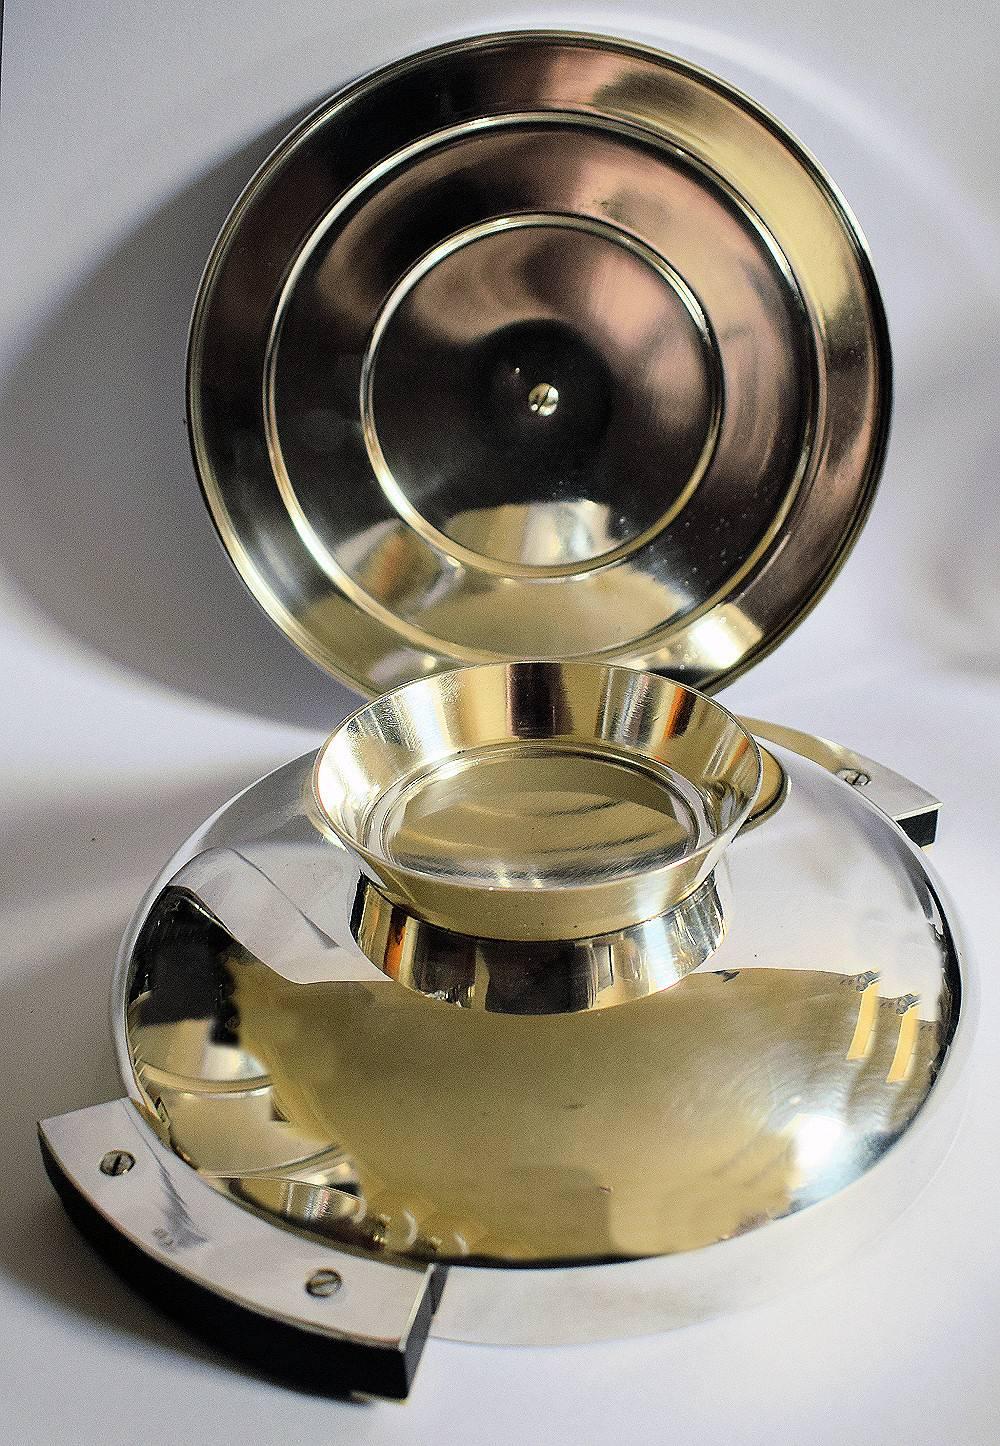 High style modernist sliver plate lidded serving dish. An original Art Deco piece with Palisander and bakelite detail on the curved handles. Measure: The bowl is 20 cm in diameter not including the handles. Condition is excellent as you can see from